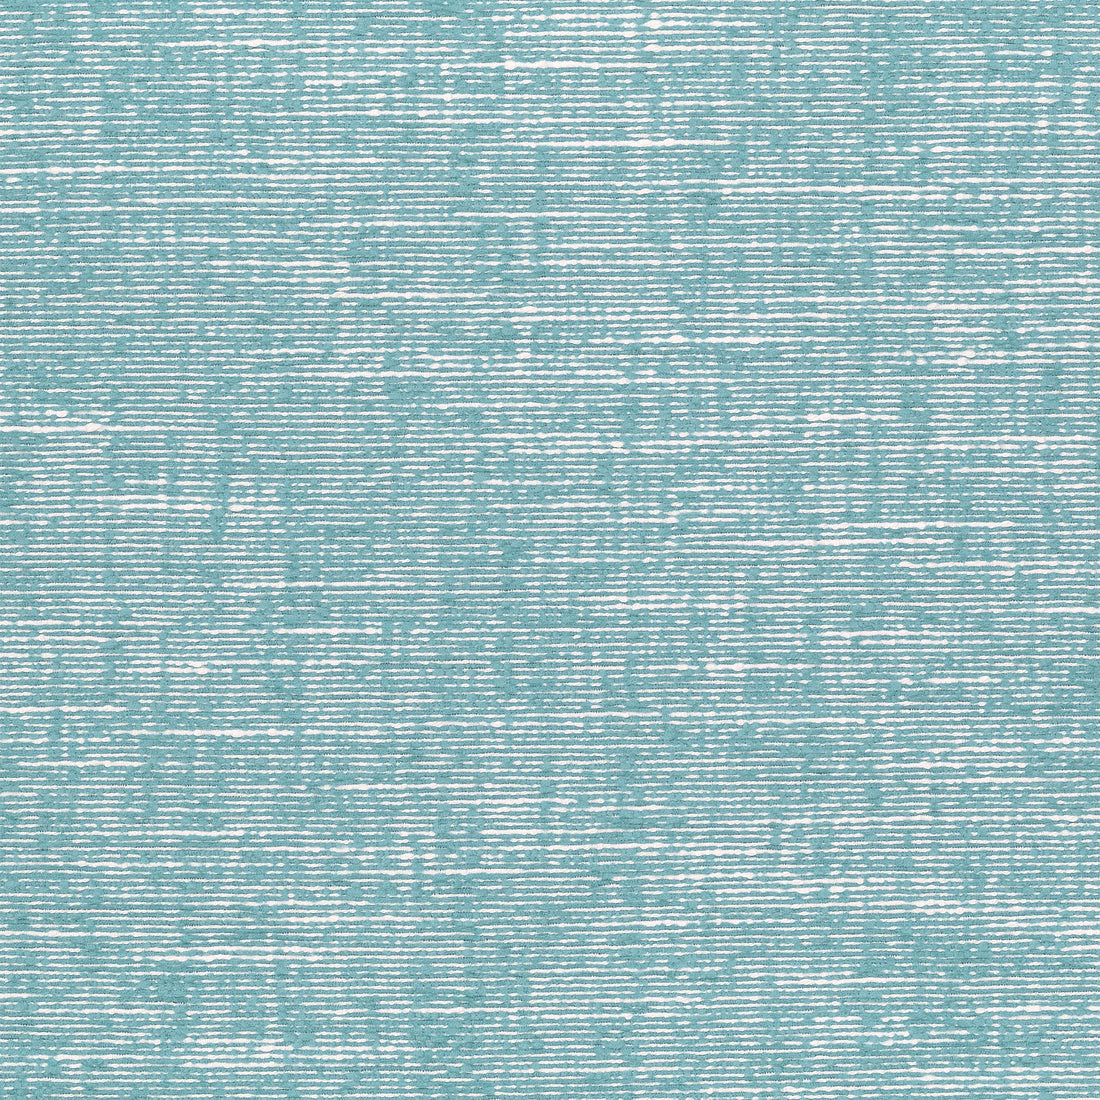 Freeport fabric in pool color - pattern number W74610 - by Thibaut in the Festival collection